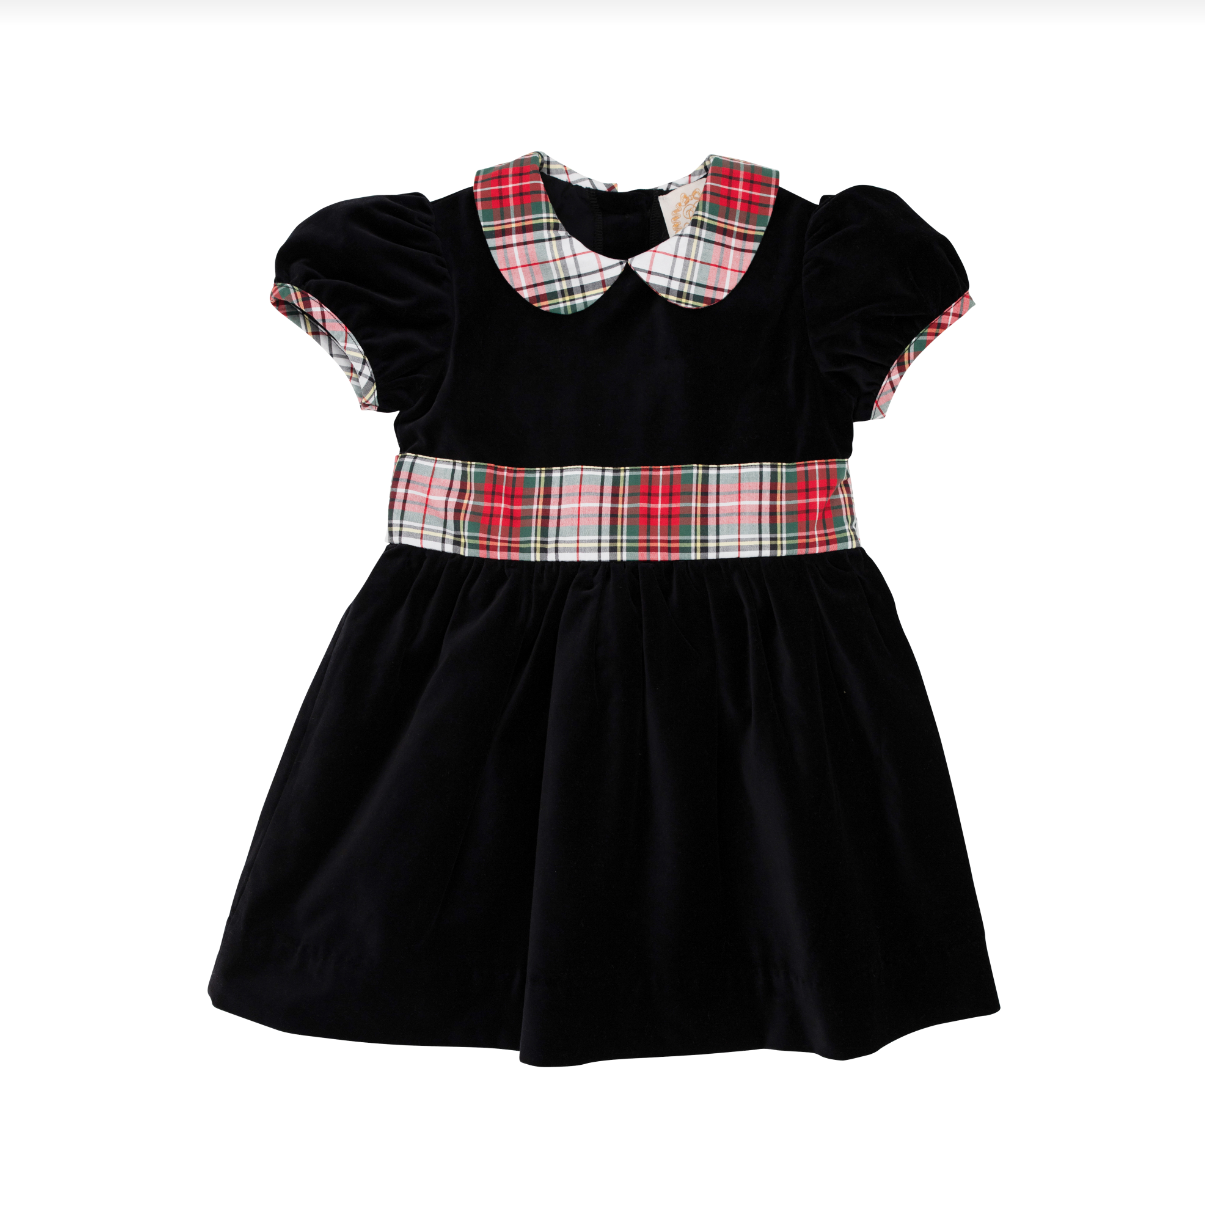 Cindy Lou Sash Dress- Velveteen in Newport Night and Keene Place Plaid, Size: 2T